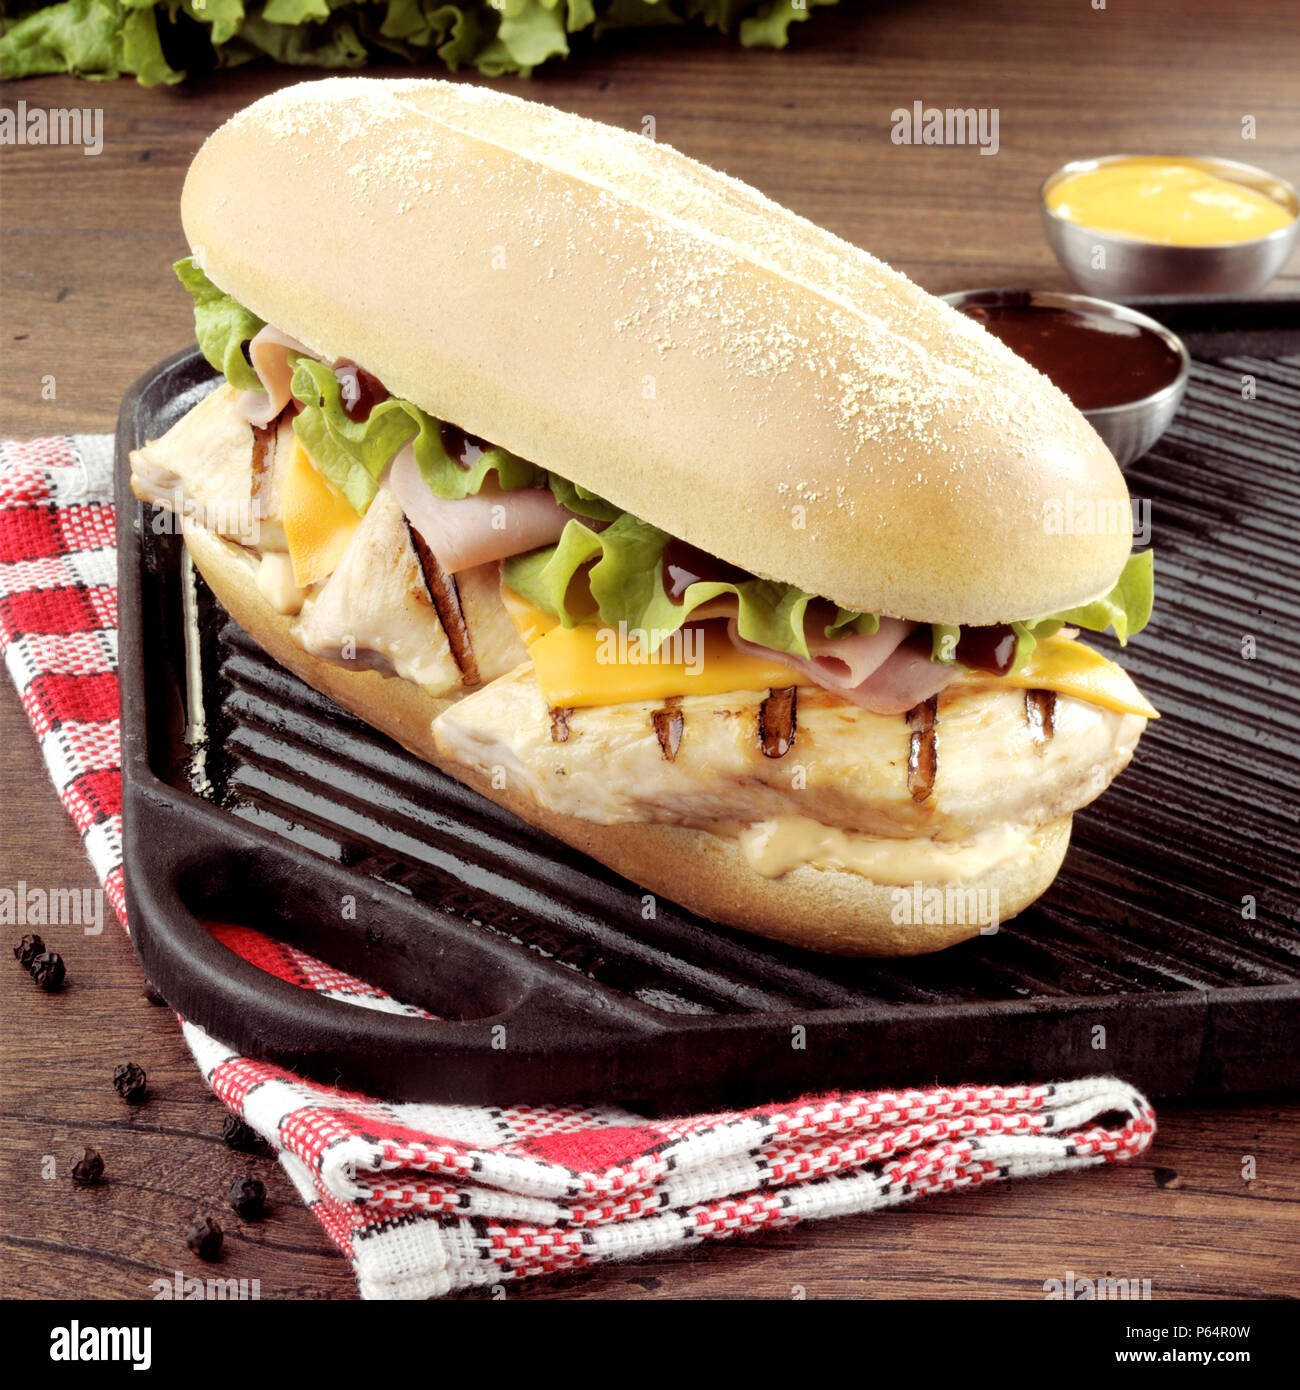 Chicken and cheese sub Stock Photo